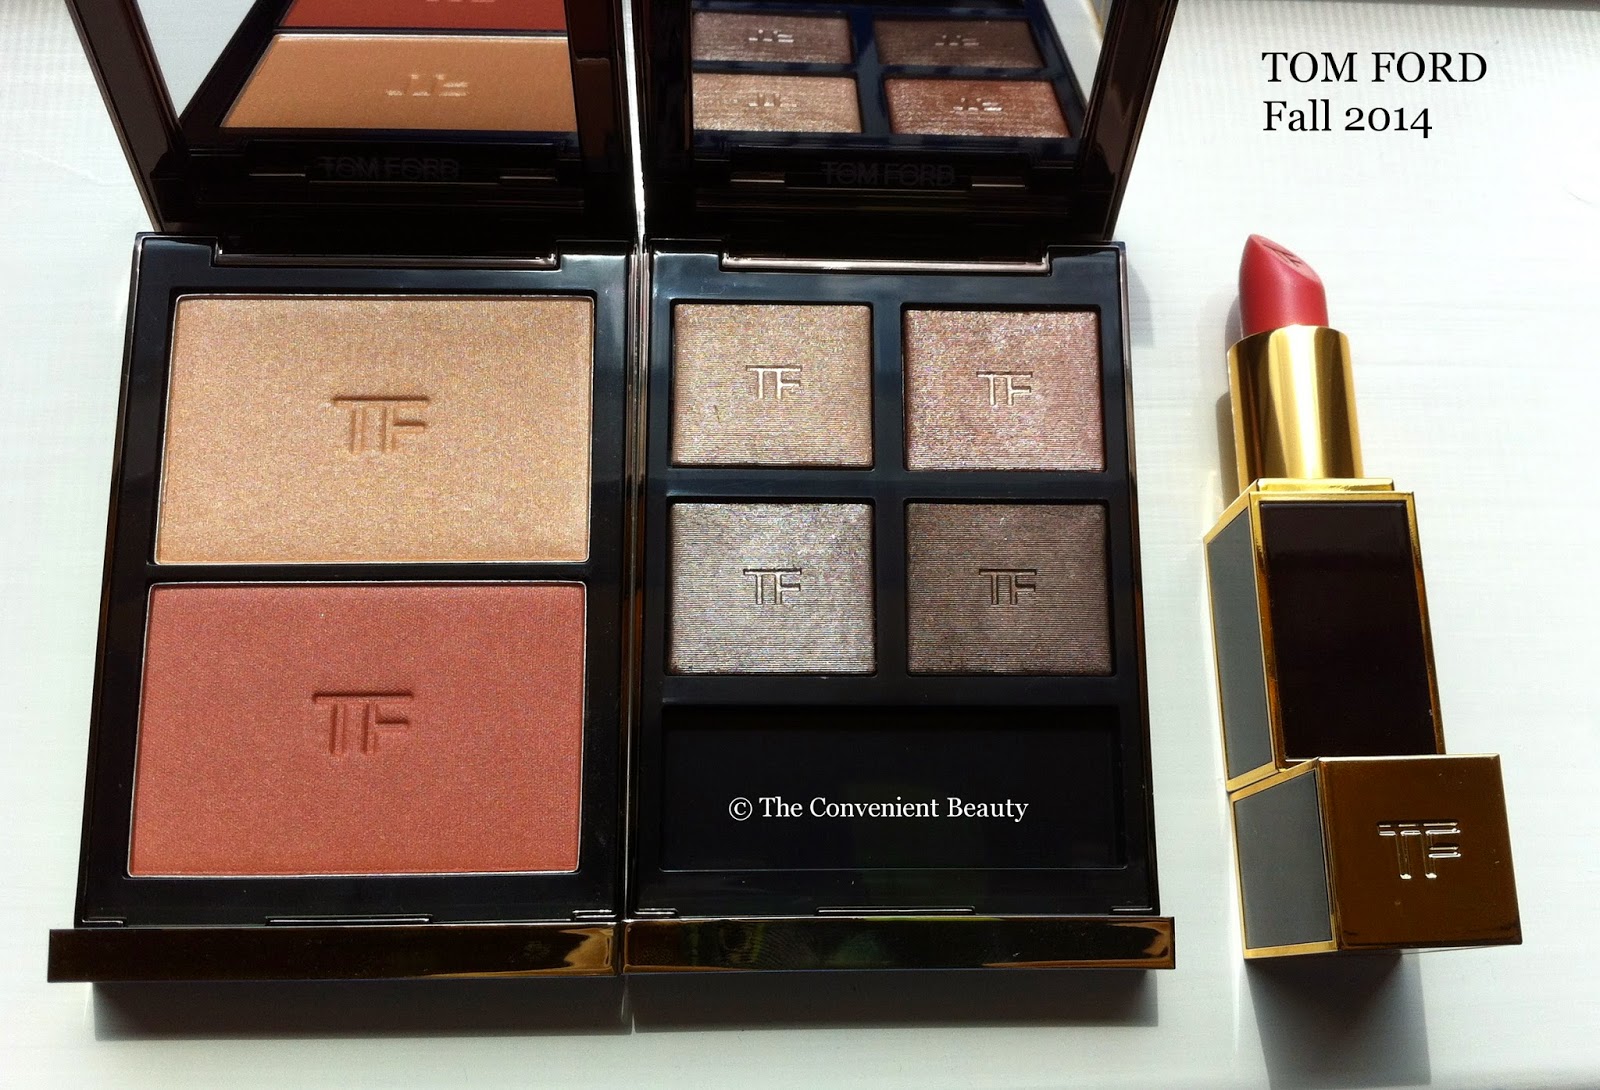 The Convenient Beauty: Preview - My Pick of Tom Ford Beauty Fall 2014